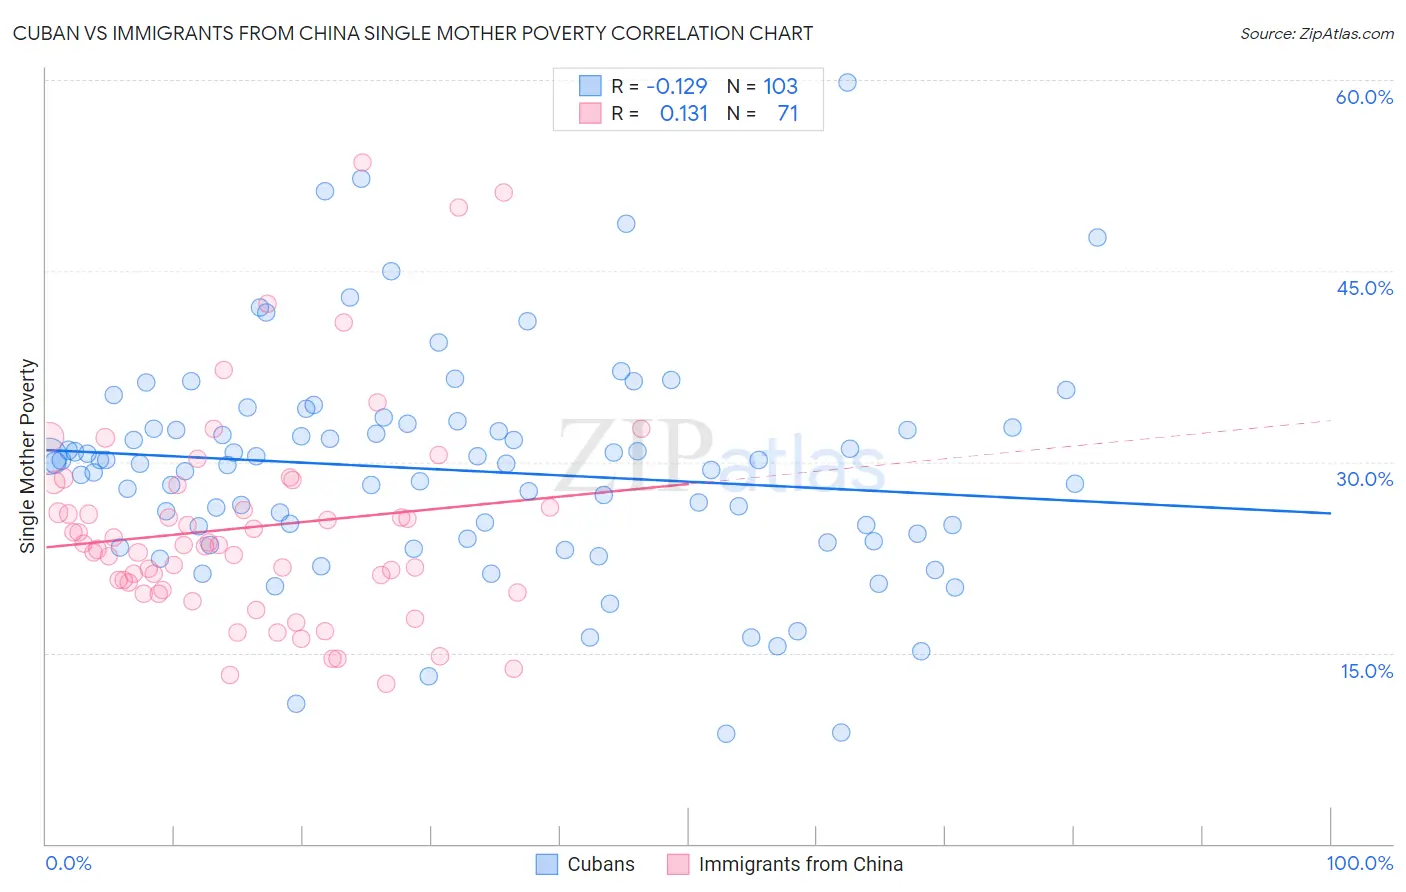 Cuban vs Immigrants from China Single Mother Poverty